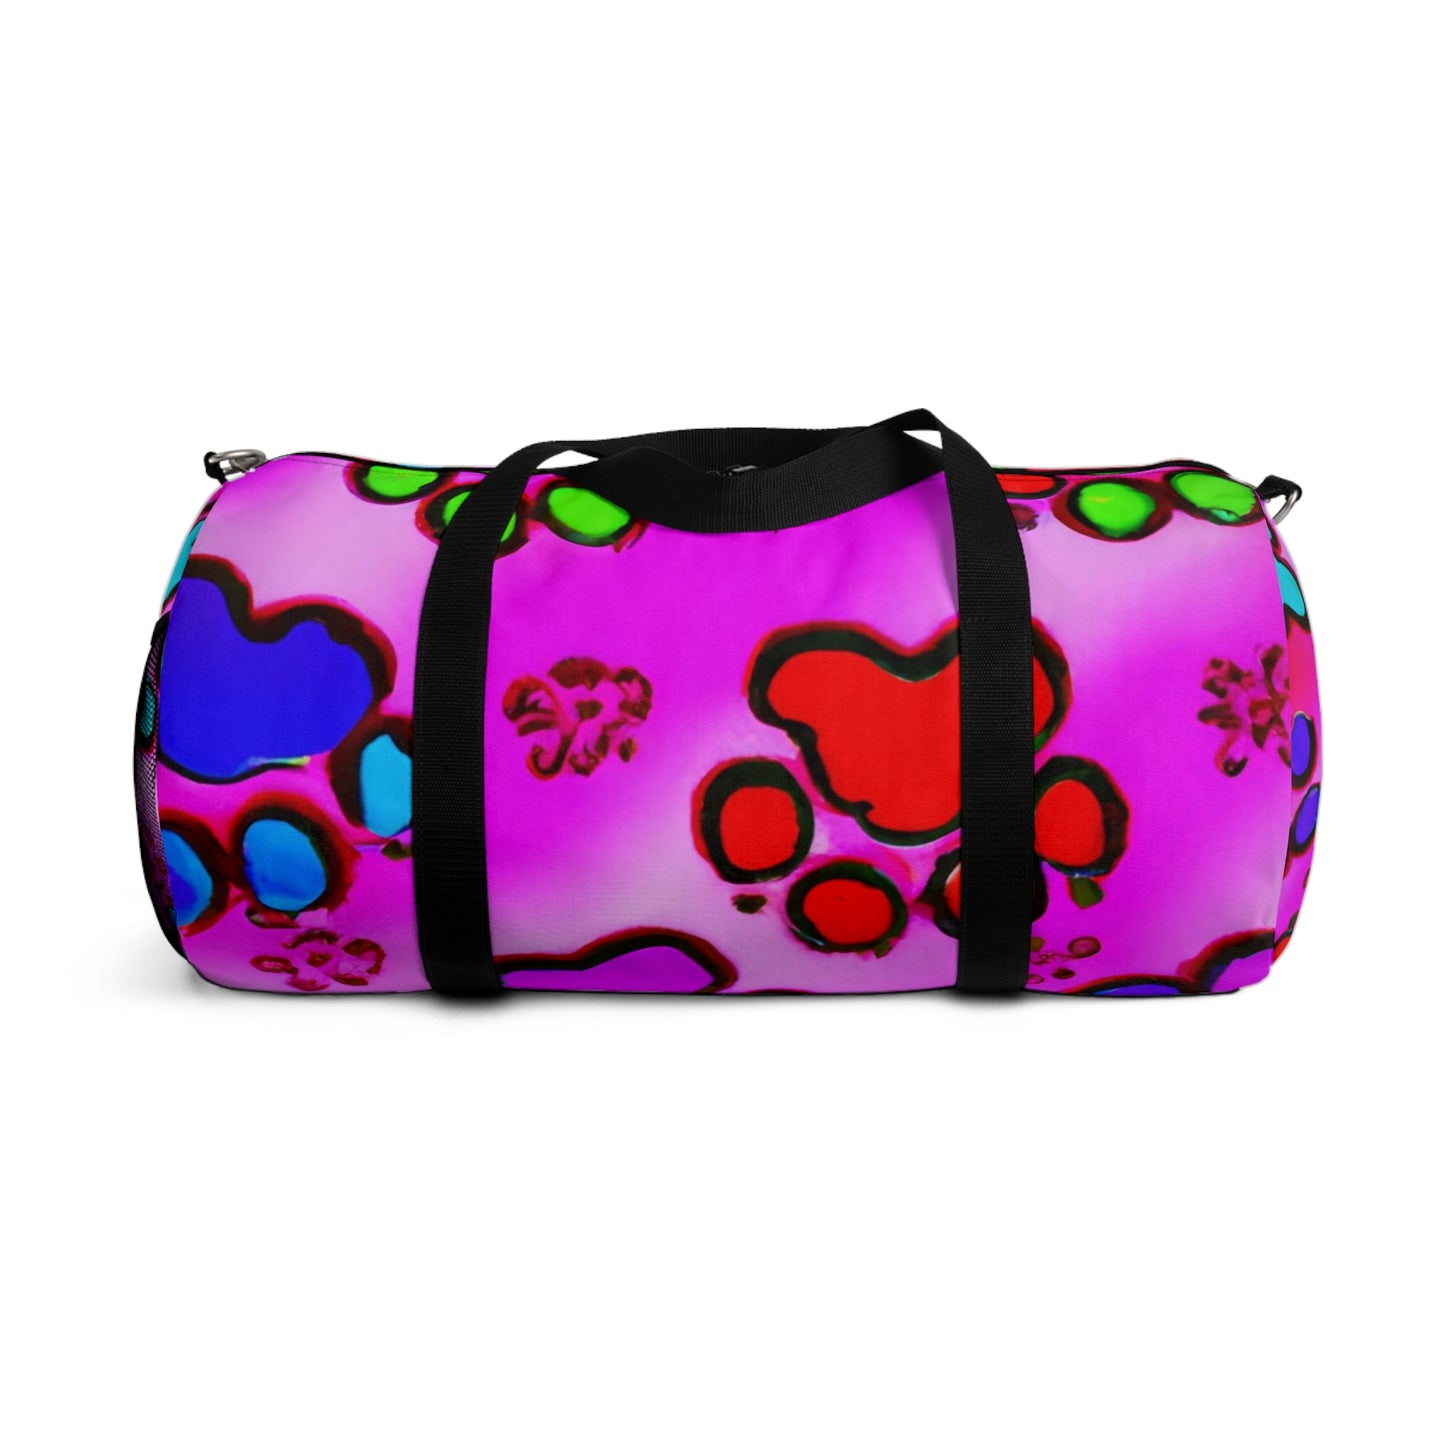 Jacques Couture - Paw Print - Duffel Bag